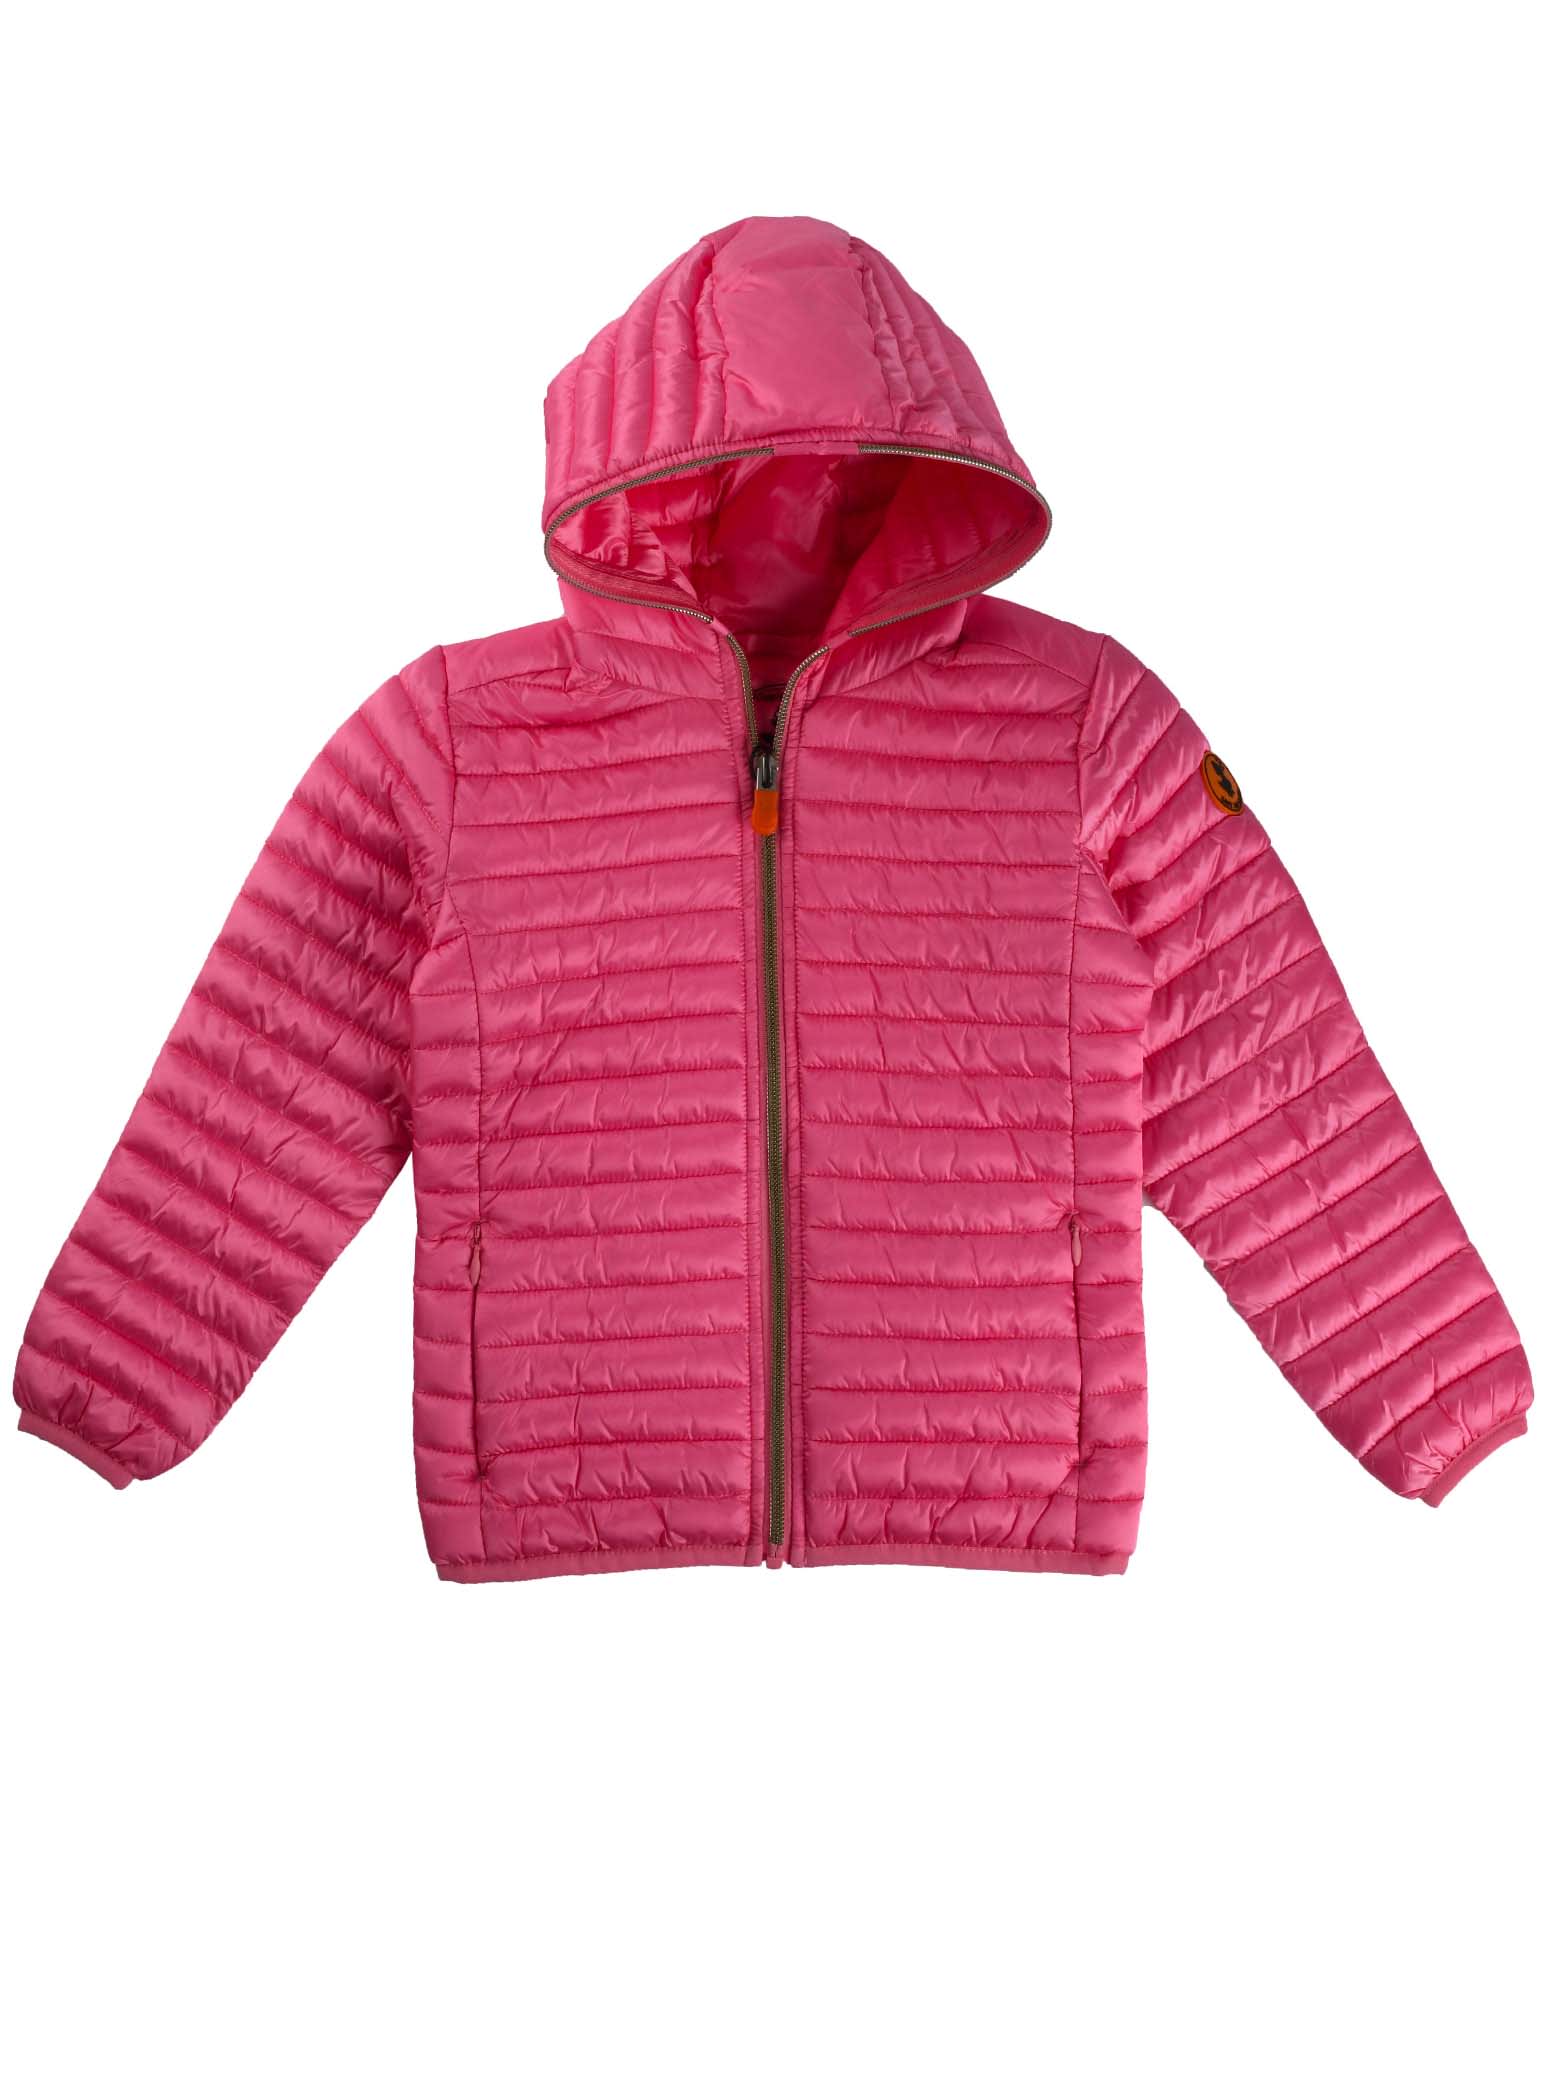 Save the Duck Bubble Pink Hooded Jacket